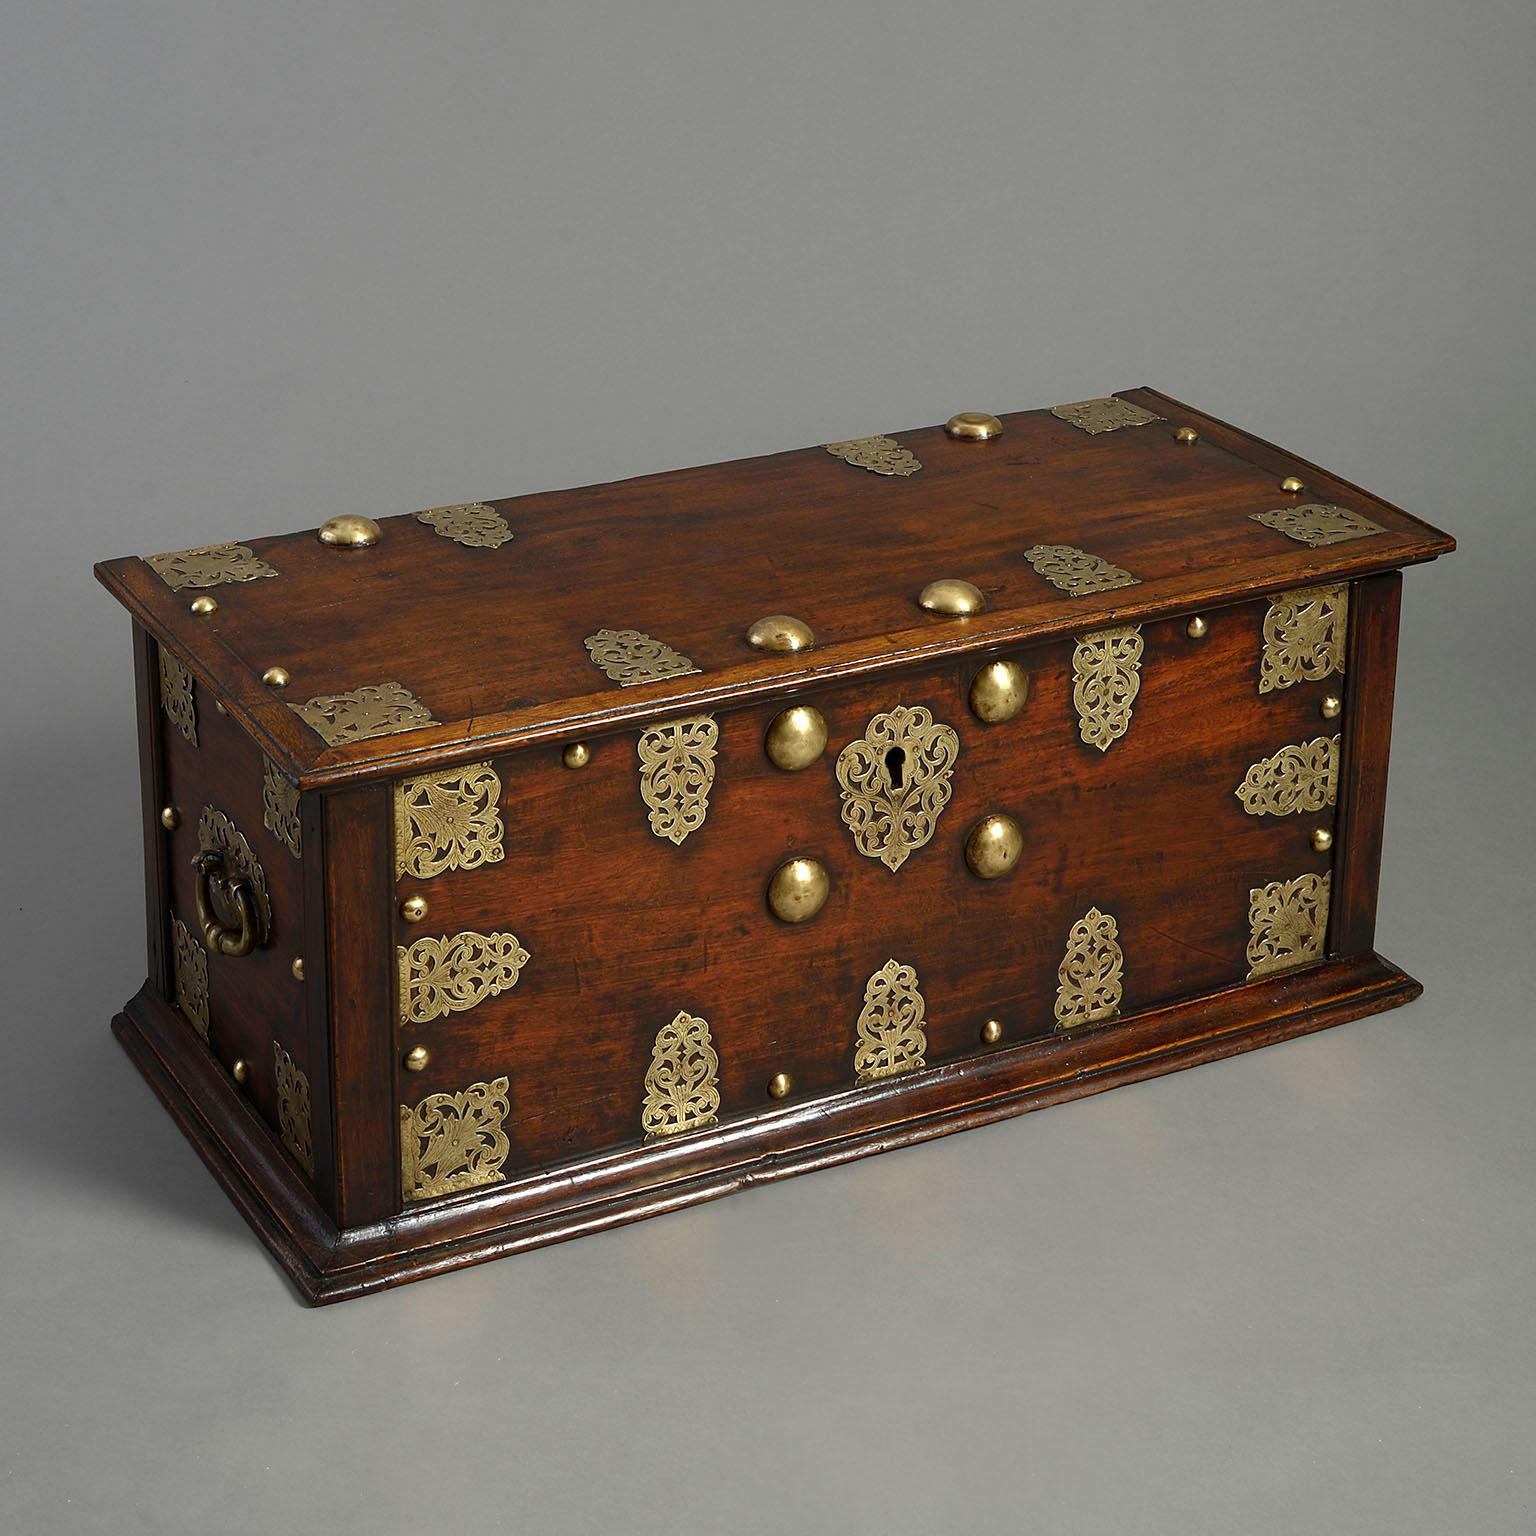 An 18th century hardwood and brass mounted chest, the iron-hinged top, sides and front decorated with pierced foliate mounts and studs, with carrying handles at either end.